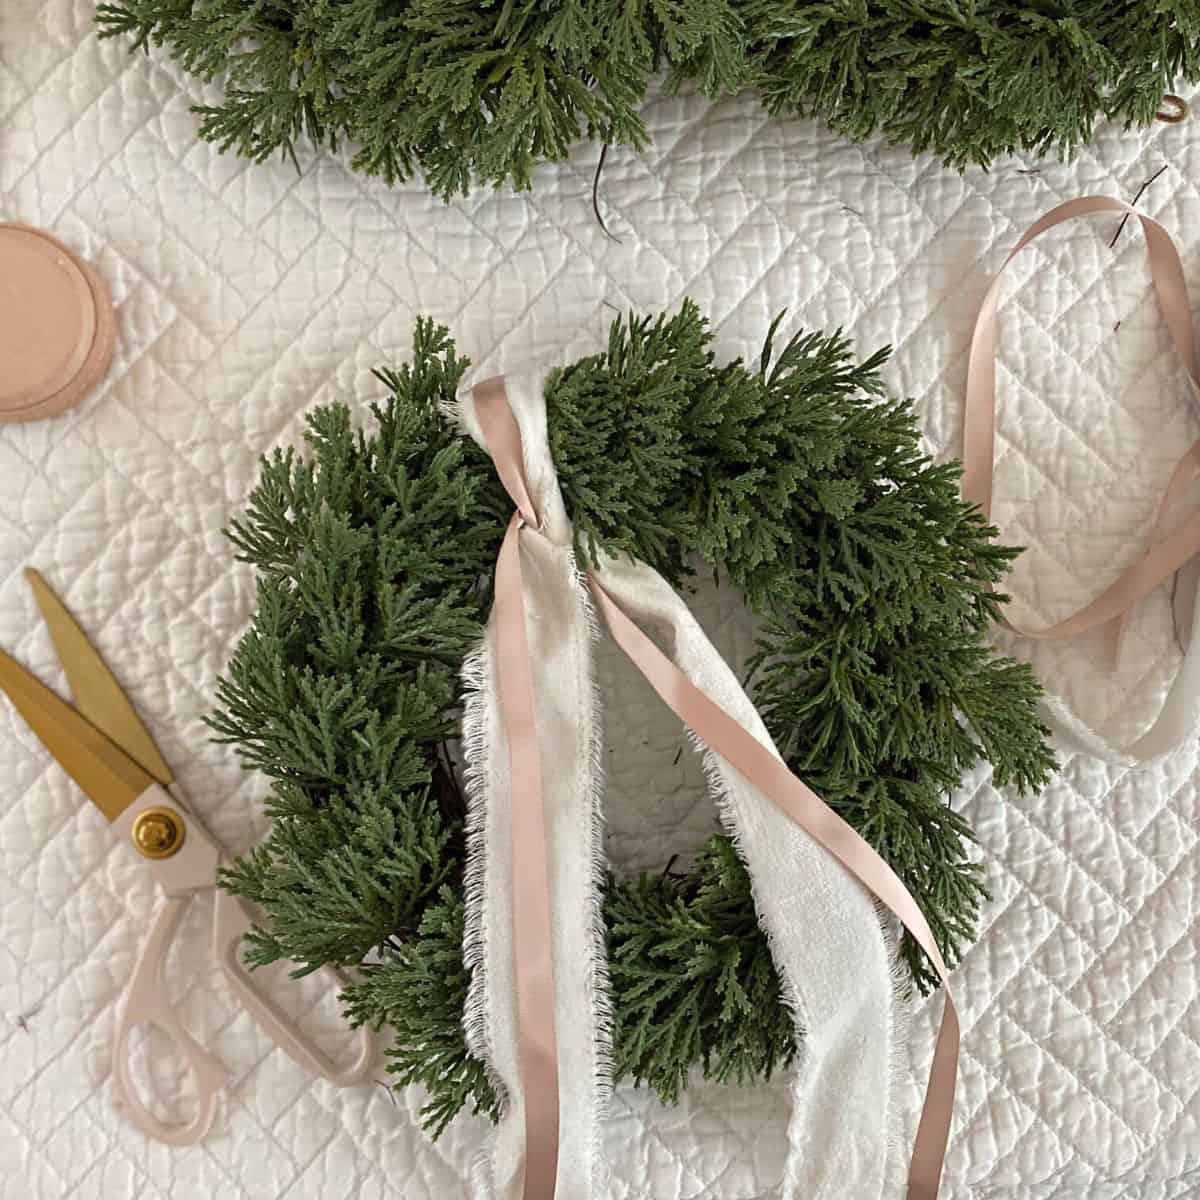 process to tie ribbon on wreaths